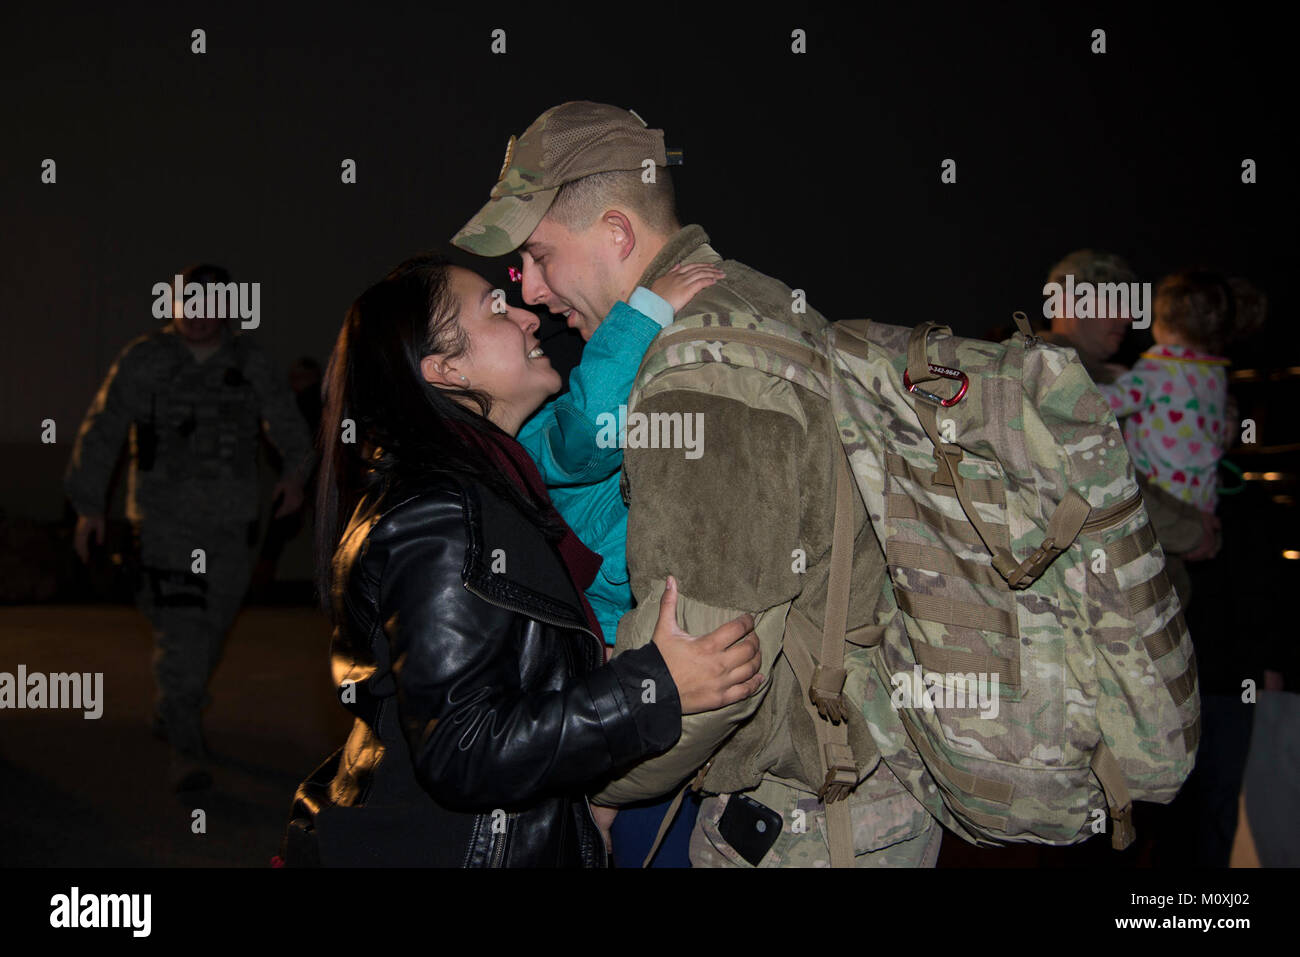 Staff Sgt. Justin Stevenson, 436th Security Forces Squadron defender, kisses his wife, Jamielee, while hugging his daughter, Julia, upon his return home from deployment to the Middle East Jan. 21, 2018, at Dover Air Force Base, Del. Stevenson’s team has been deployed since July 2017. (U.S. Air Force Stock Photo